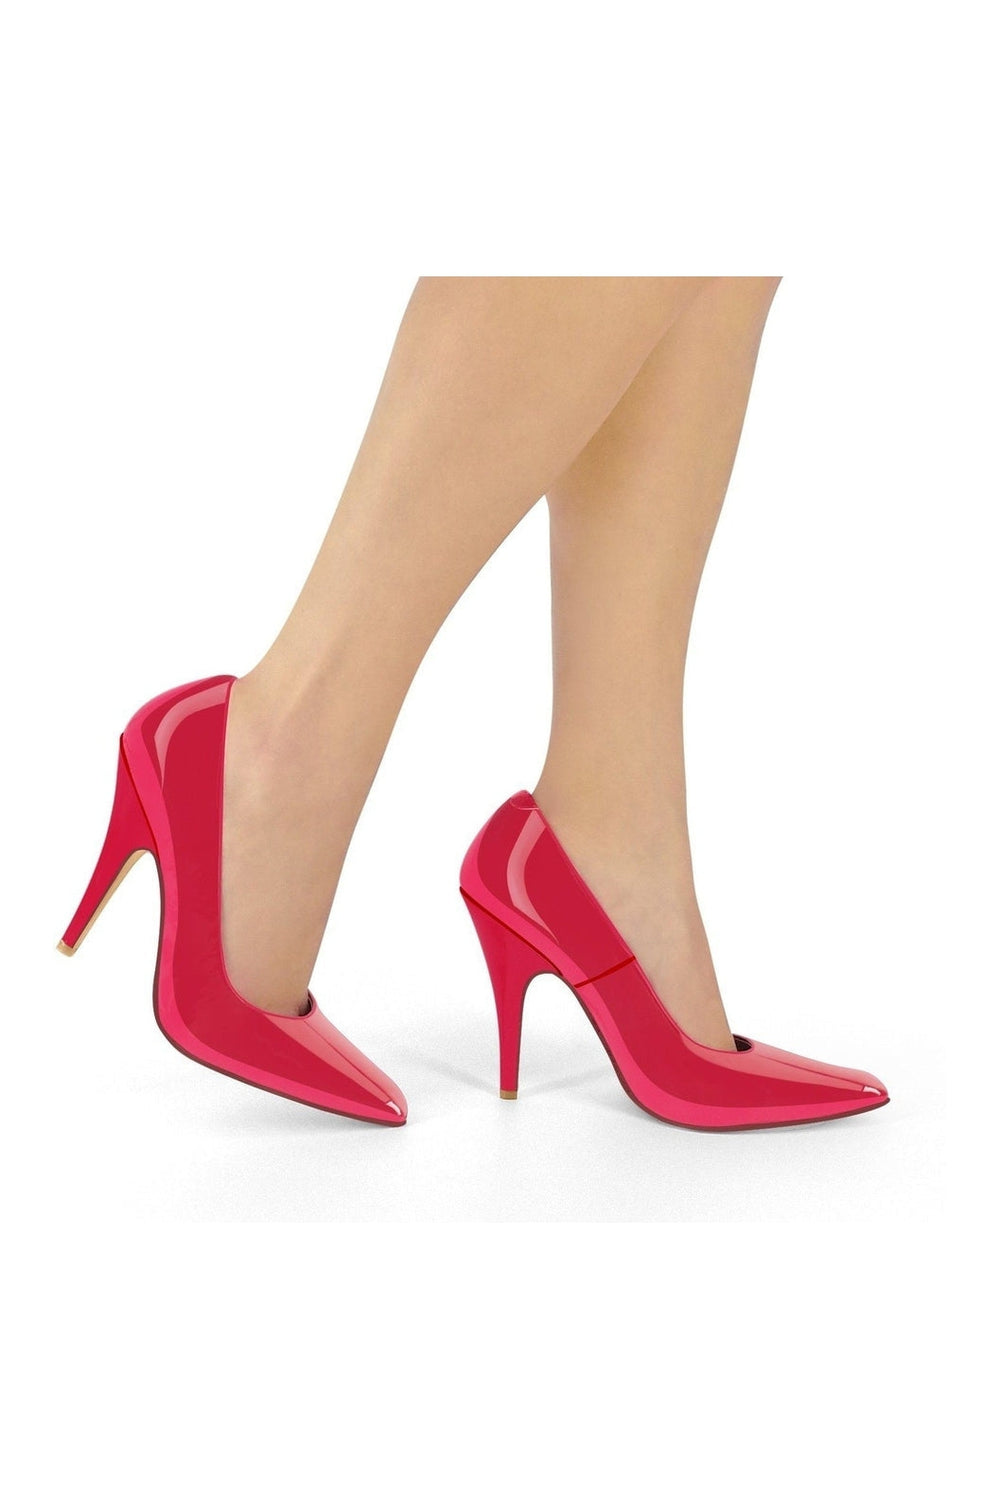 Classic Sexy Pump-Pumps-Sexyshoes Signature-Red-SEXYSHOES.COM